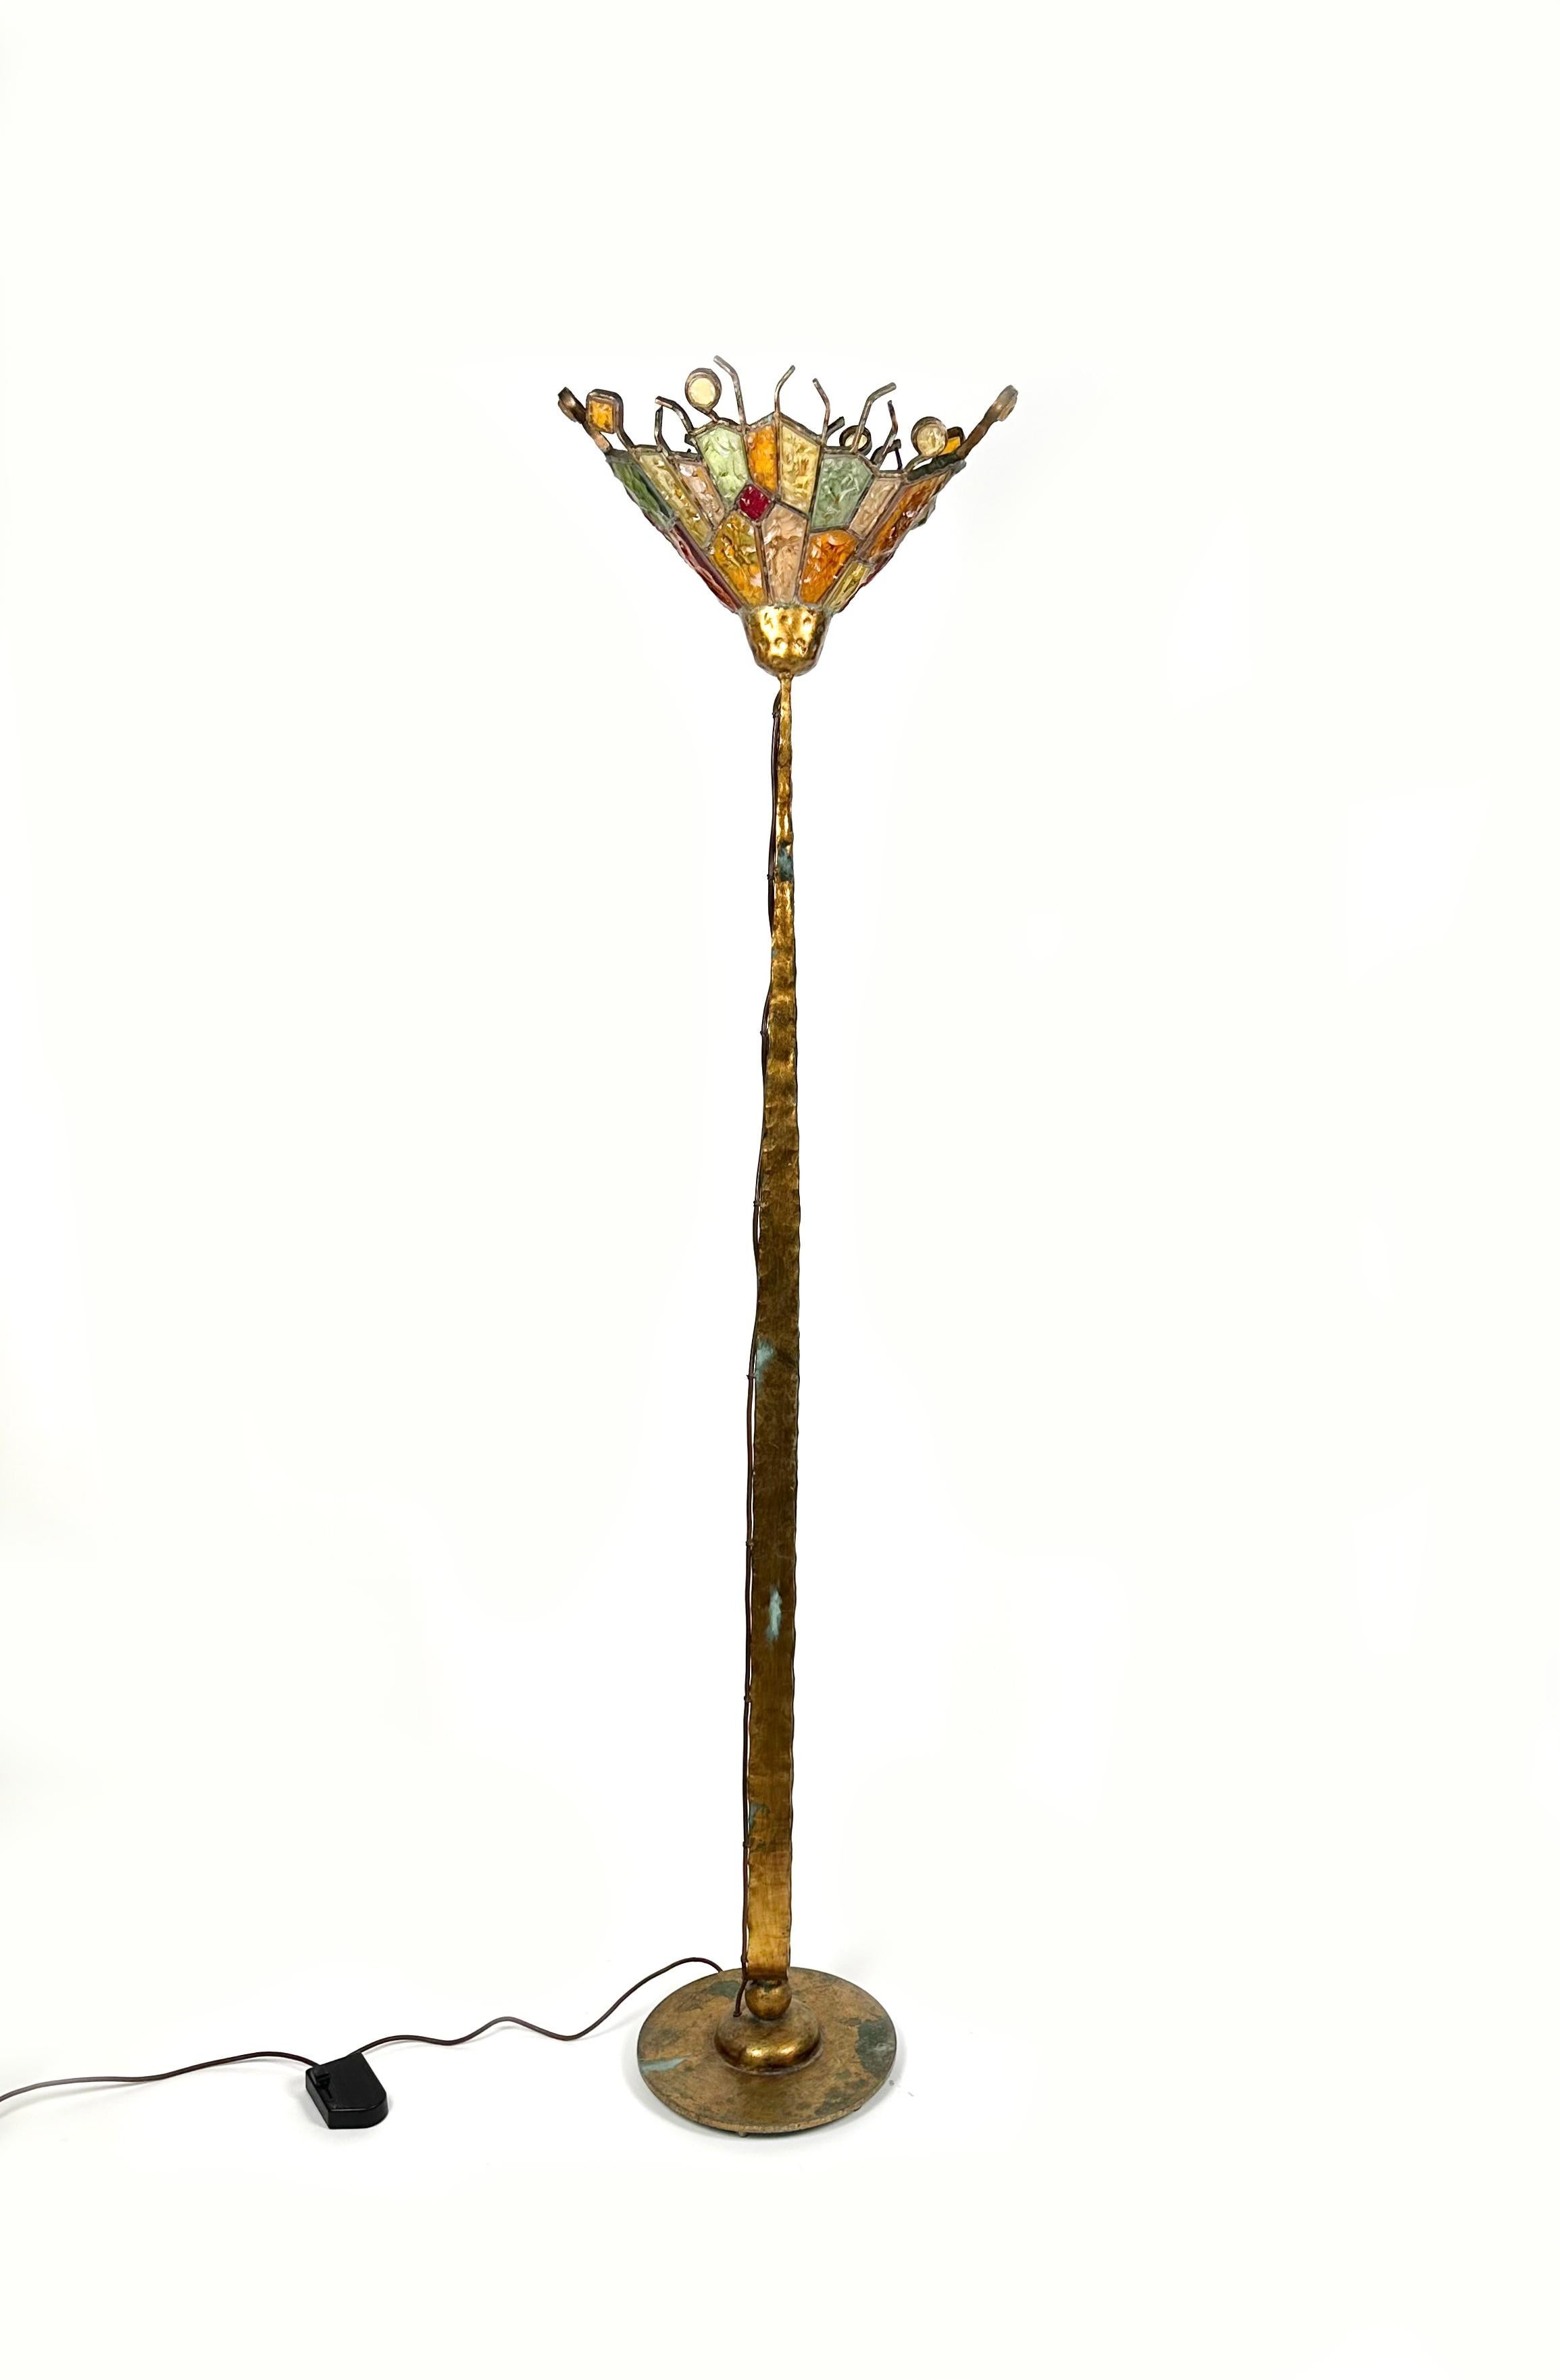 Amazing Floor lamp in gold Iron and colorful art glass by Albano Poli for Poliarte.

Made in Italy in the 1970s.

Poliarte was founded by the artist Albano Poli in 1953, initially as a producer of exceptional stained glass, moving onto create